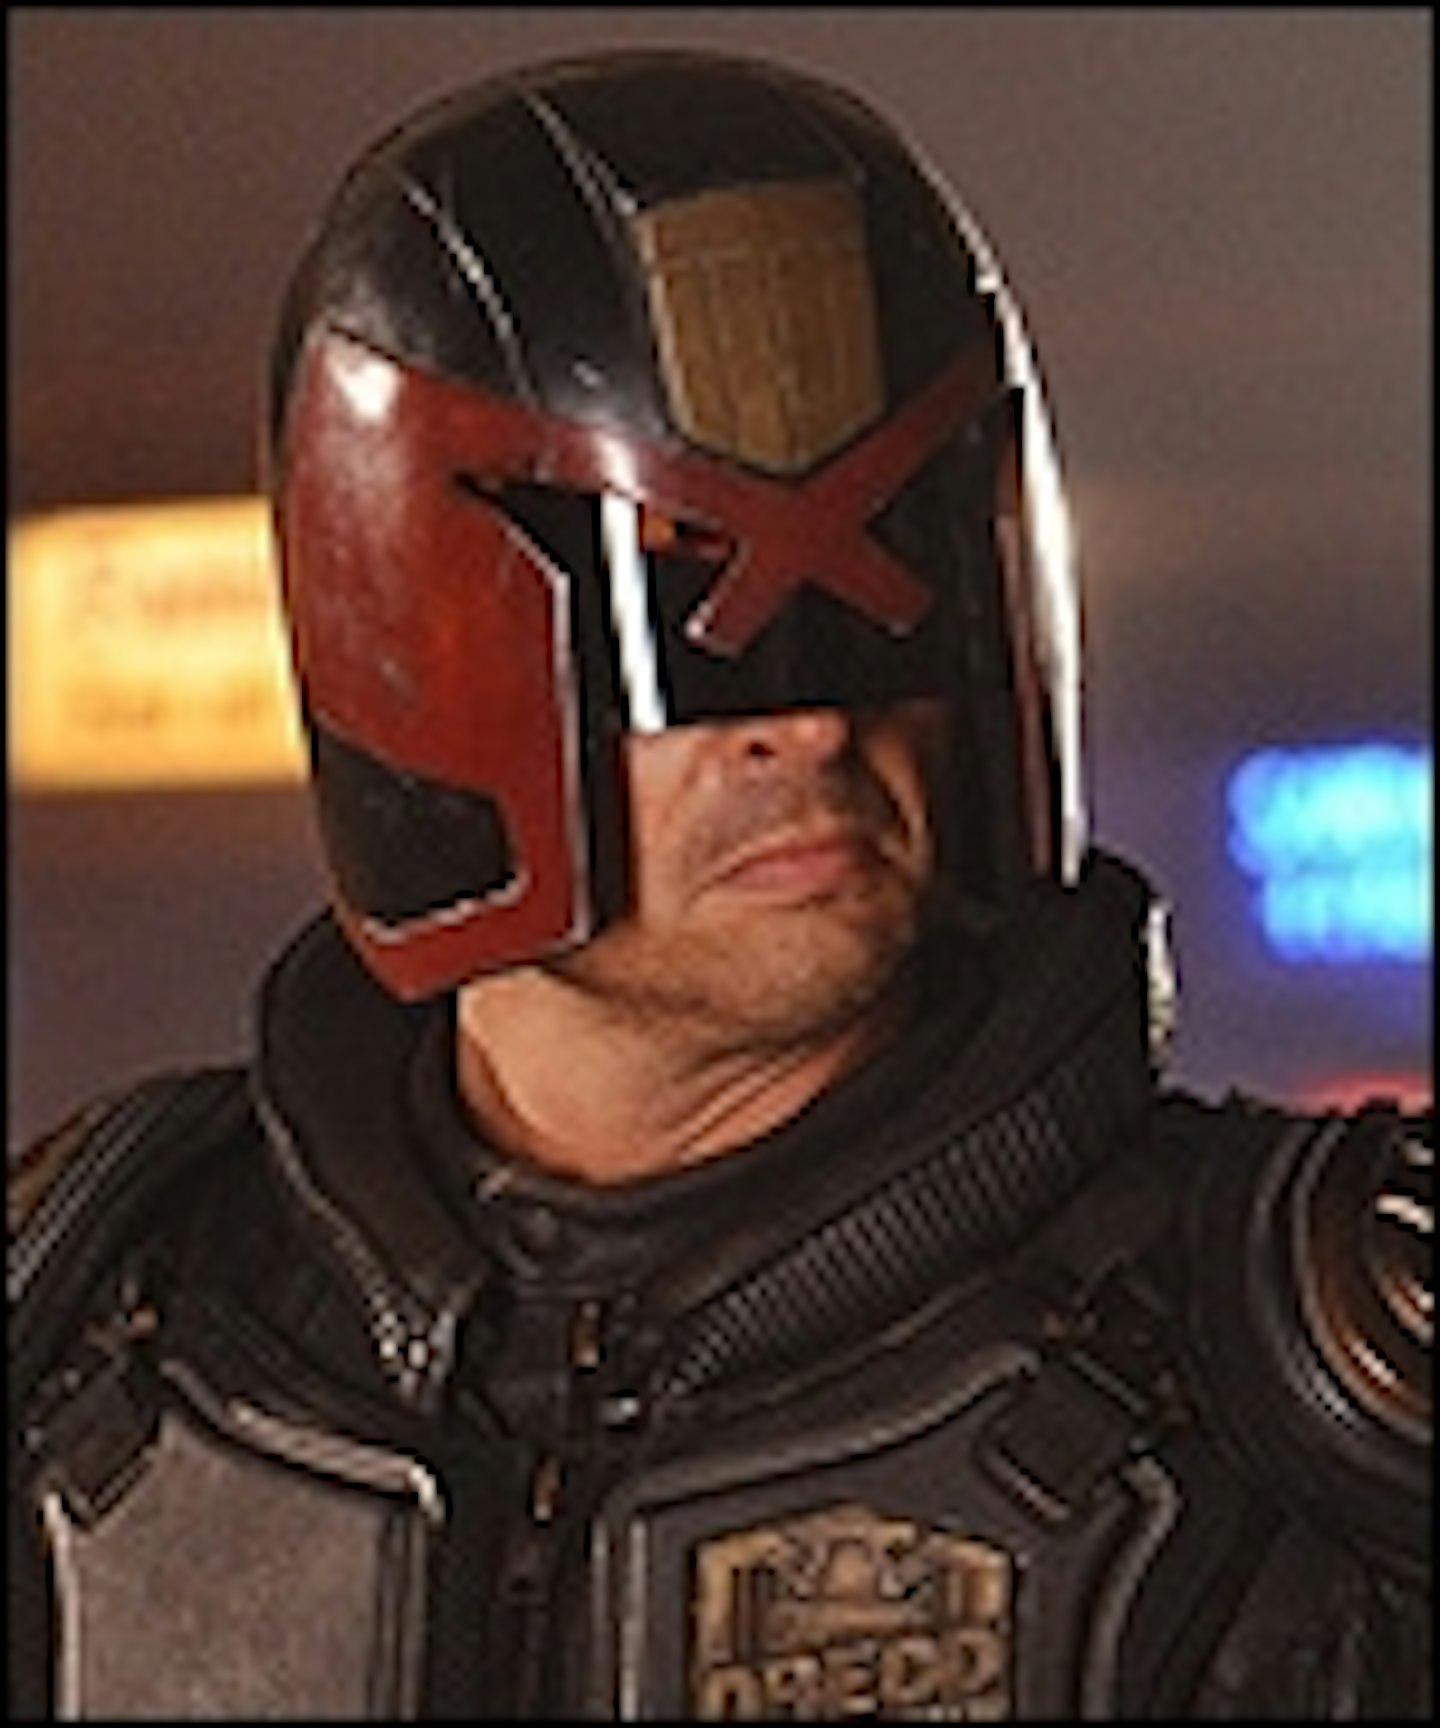 Dredd Motion Poster Shoots Up The Web